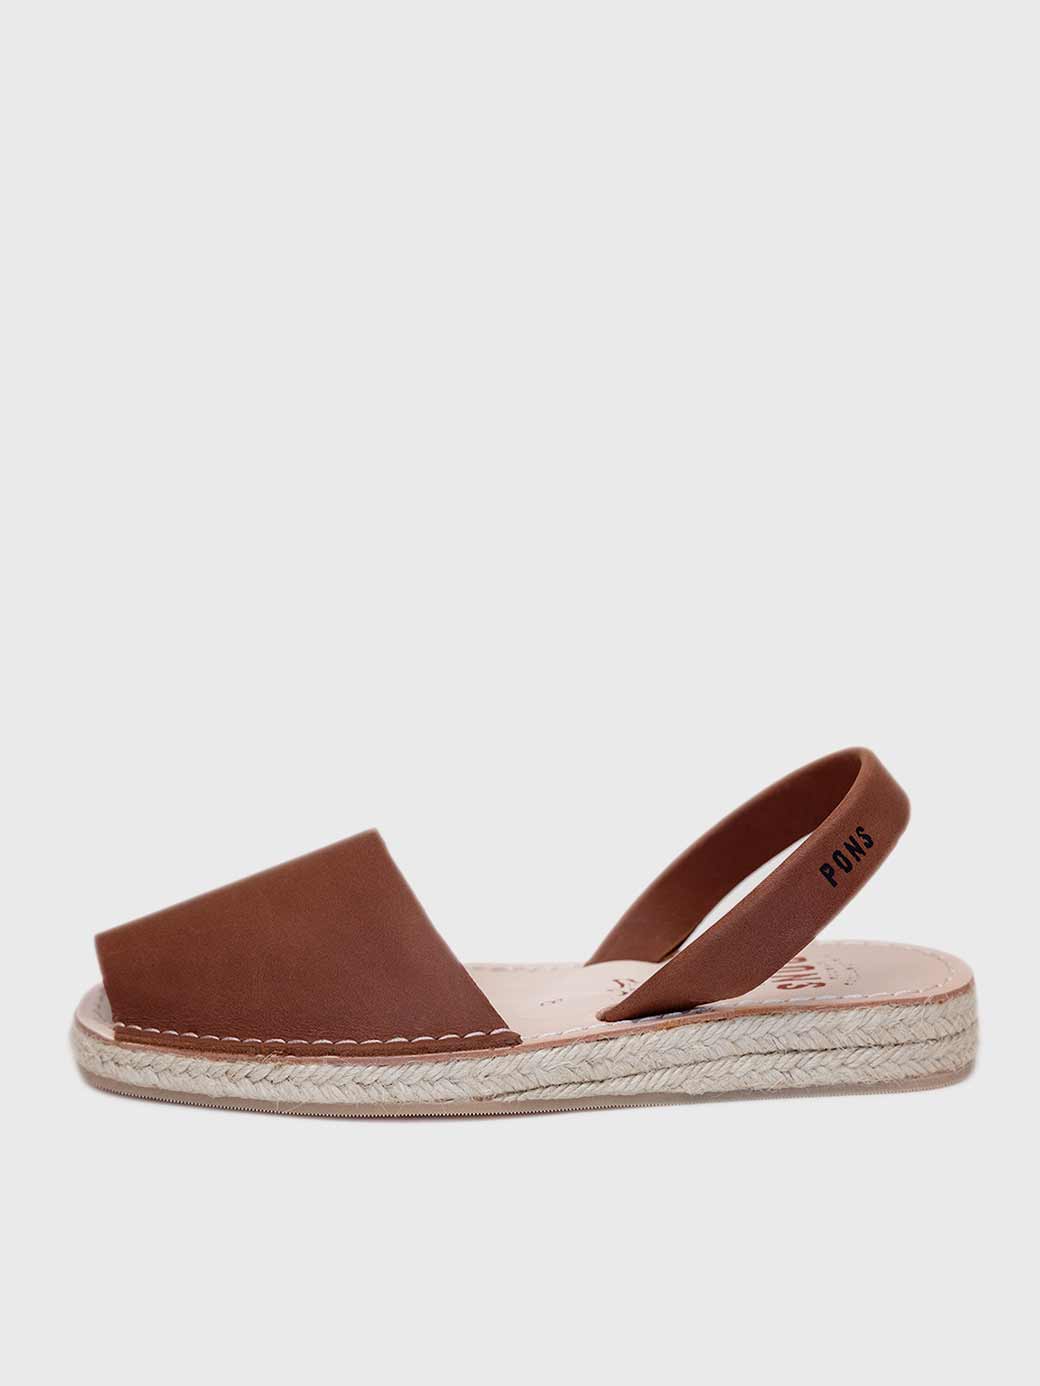 New Sandals by Pons – Classic Espadrille Avarca